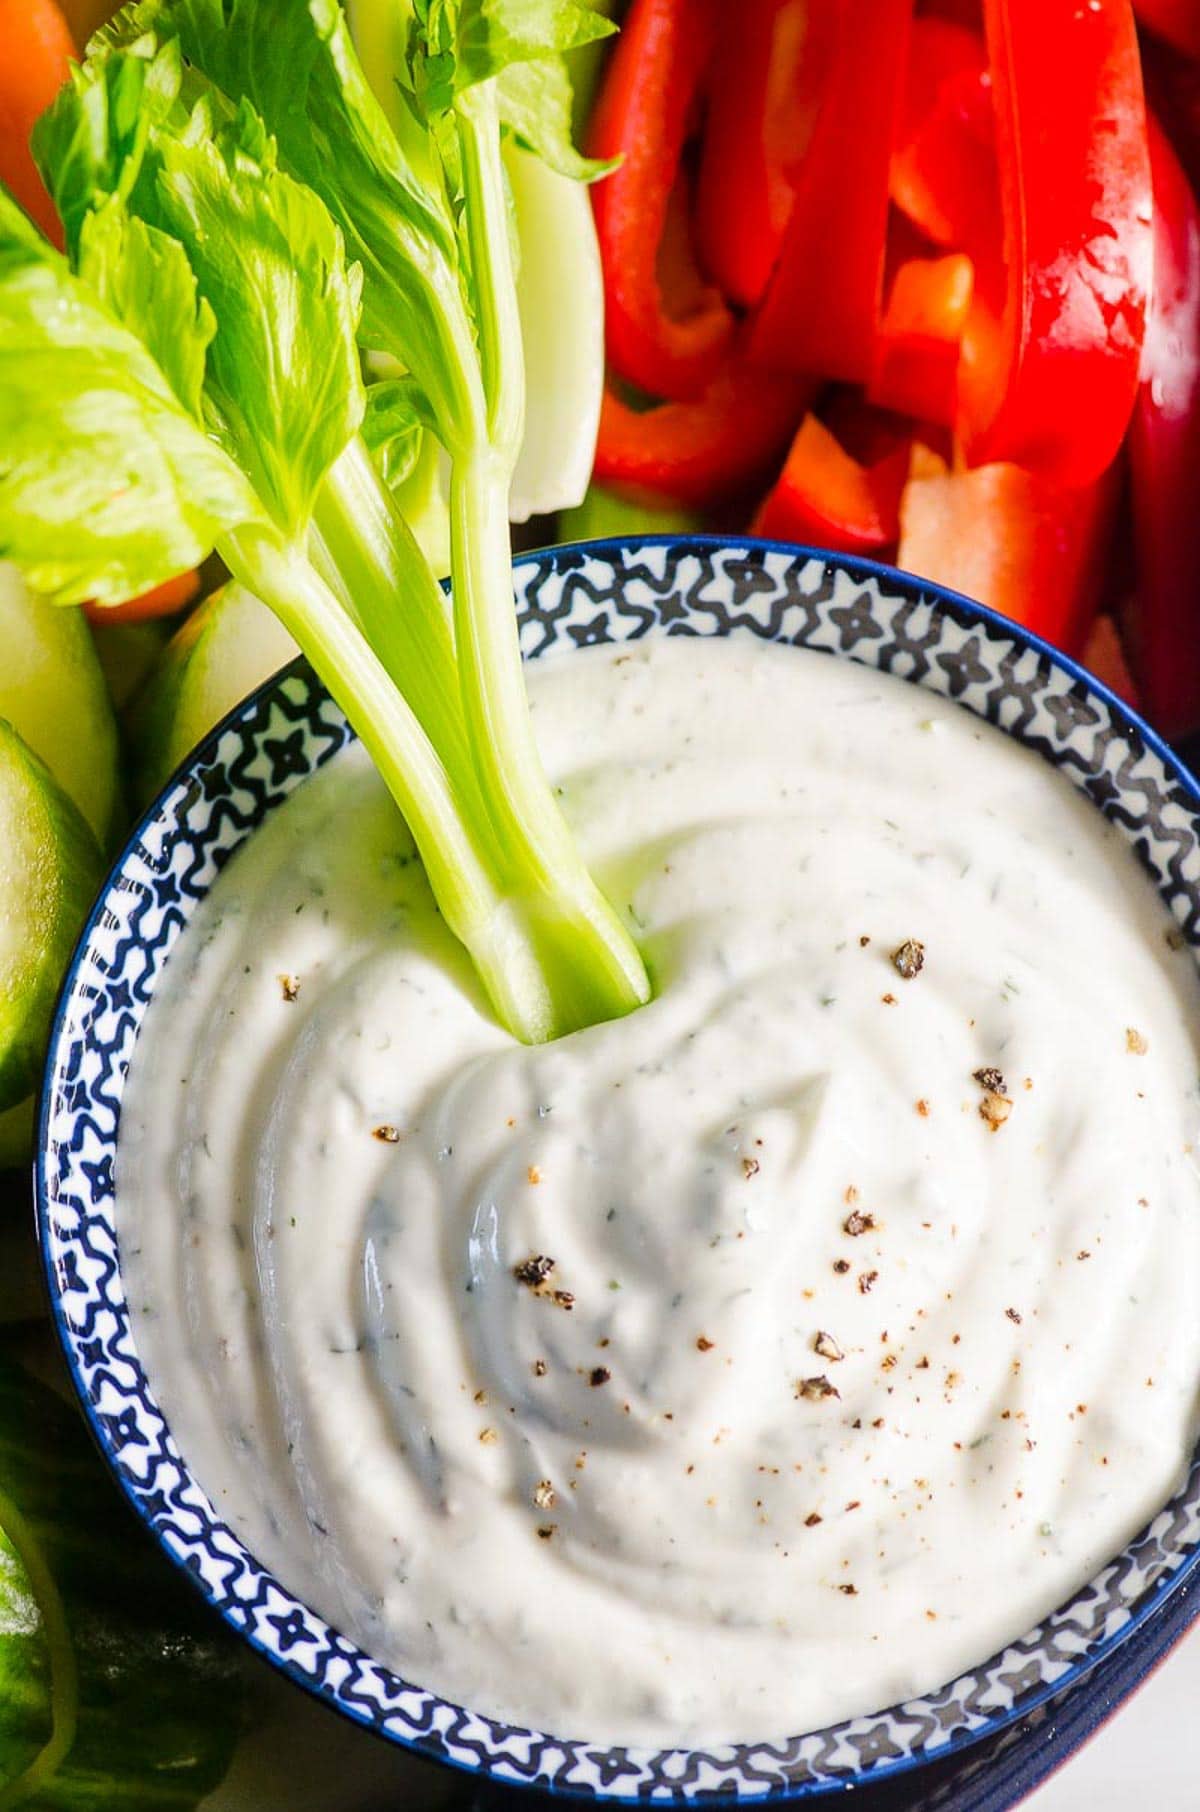 Healthy vegetable dip with a stick of celery and sliced veggies around.